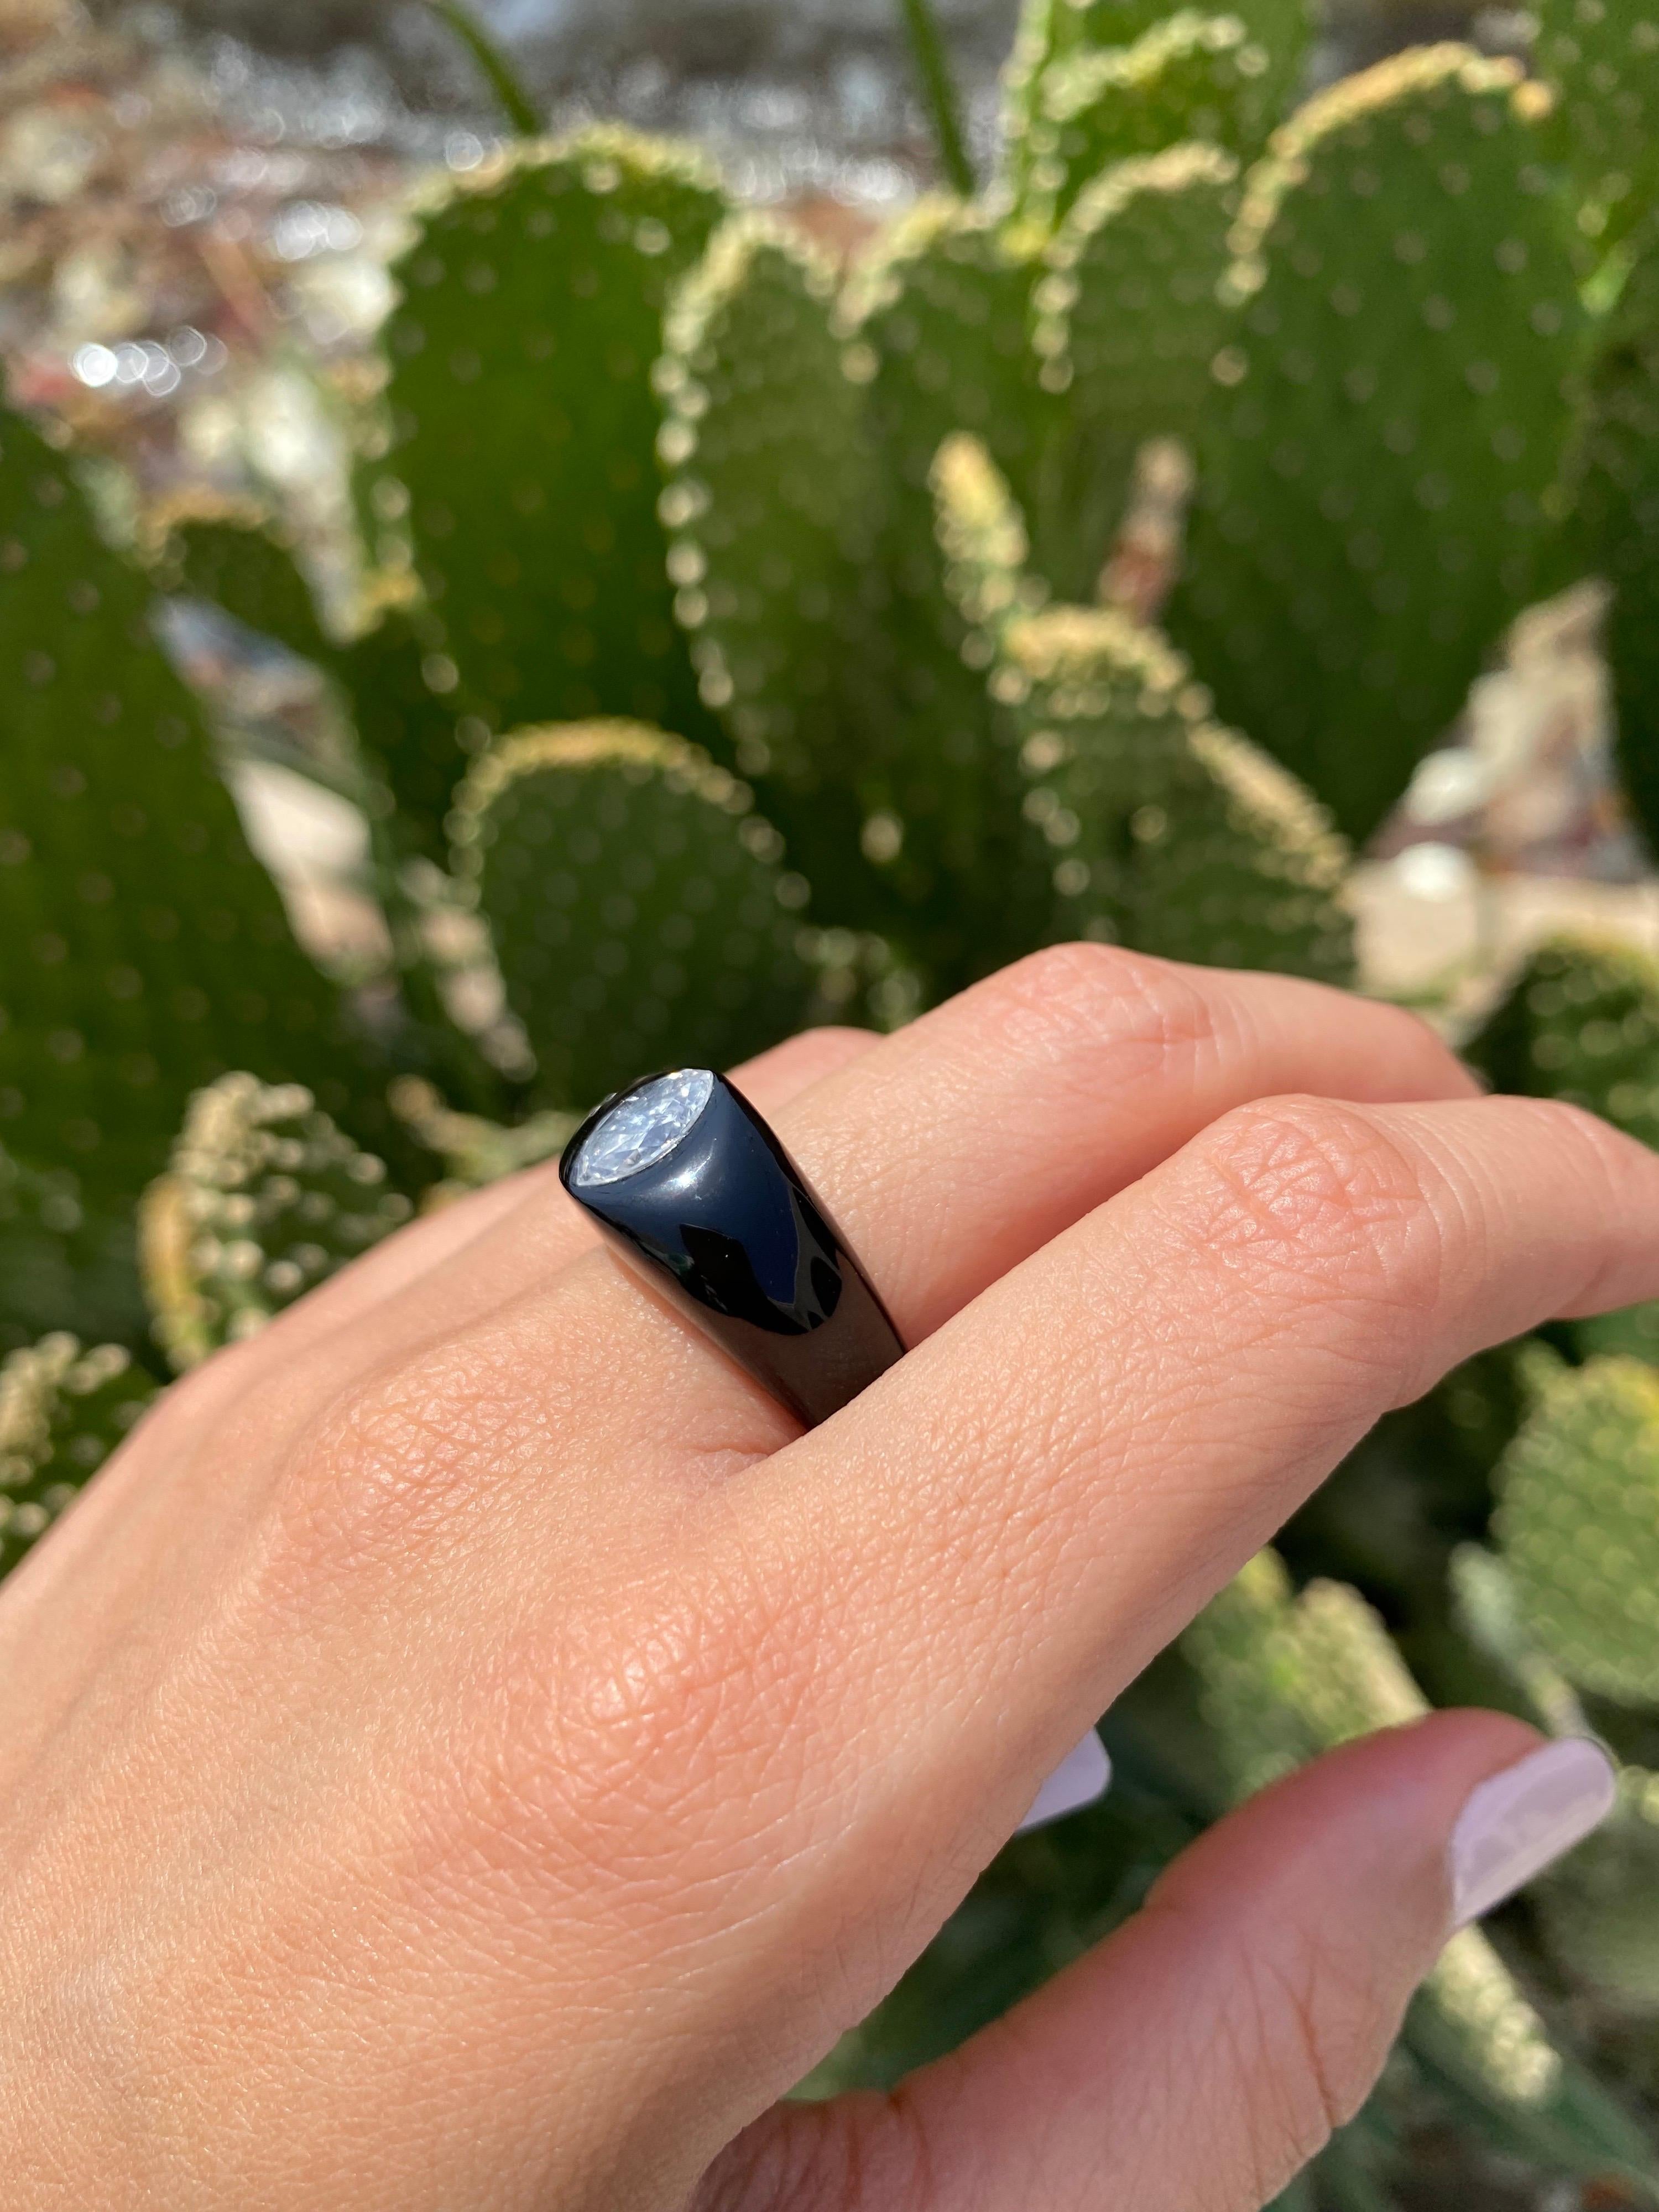 An art-deco inspired, statement 1.1 carat marquise shaped White Diamond, set in a custom cut Black Onyx ring - currently sized at US 6.5, can be customized and remade according to ring size. 
We provide free shipping, and we accept returns! 
Message